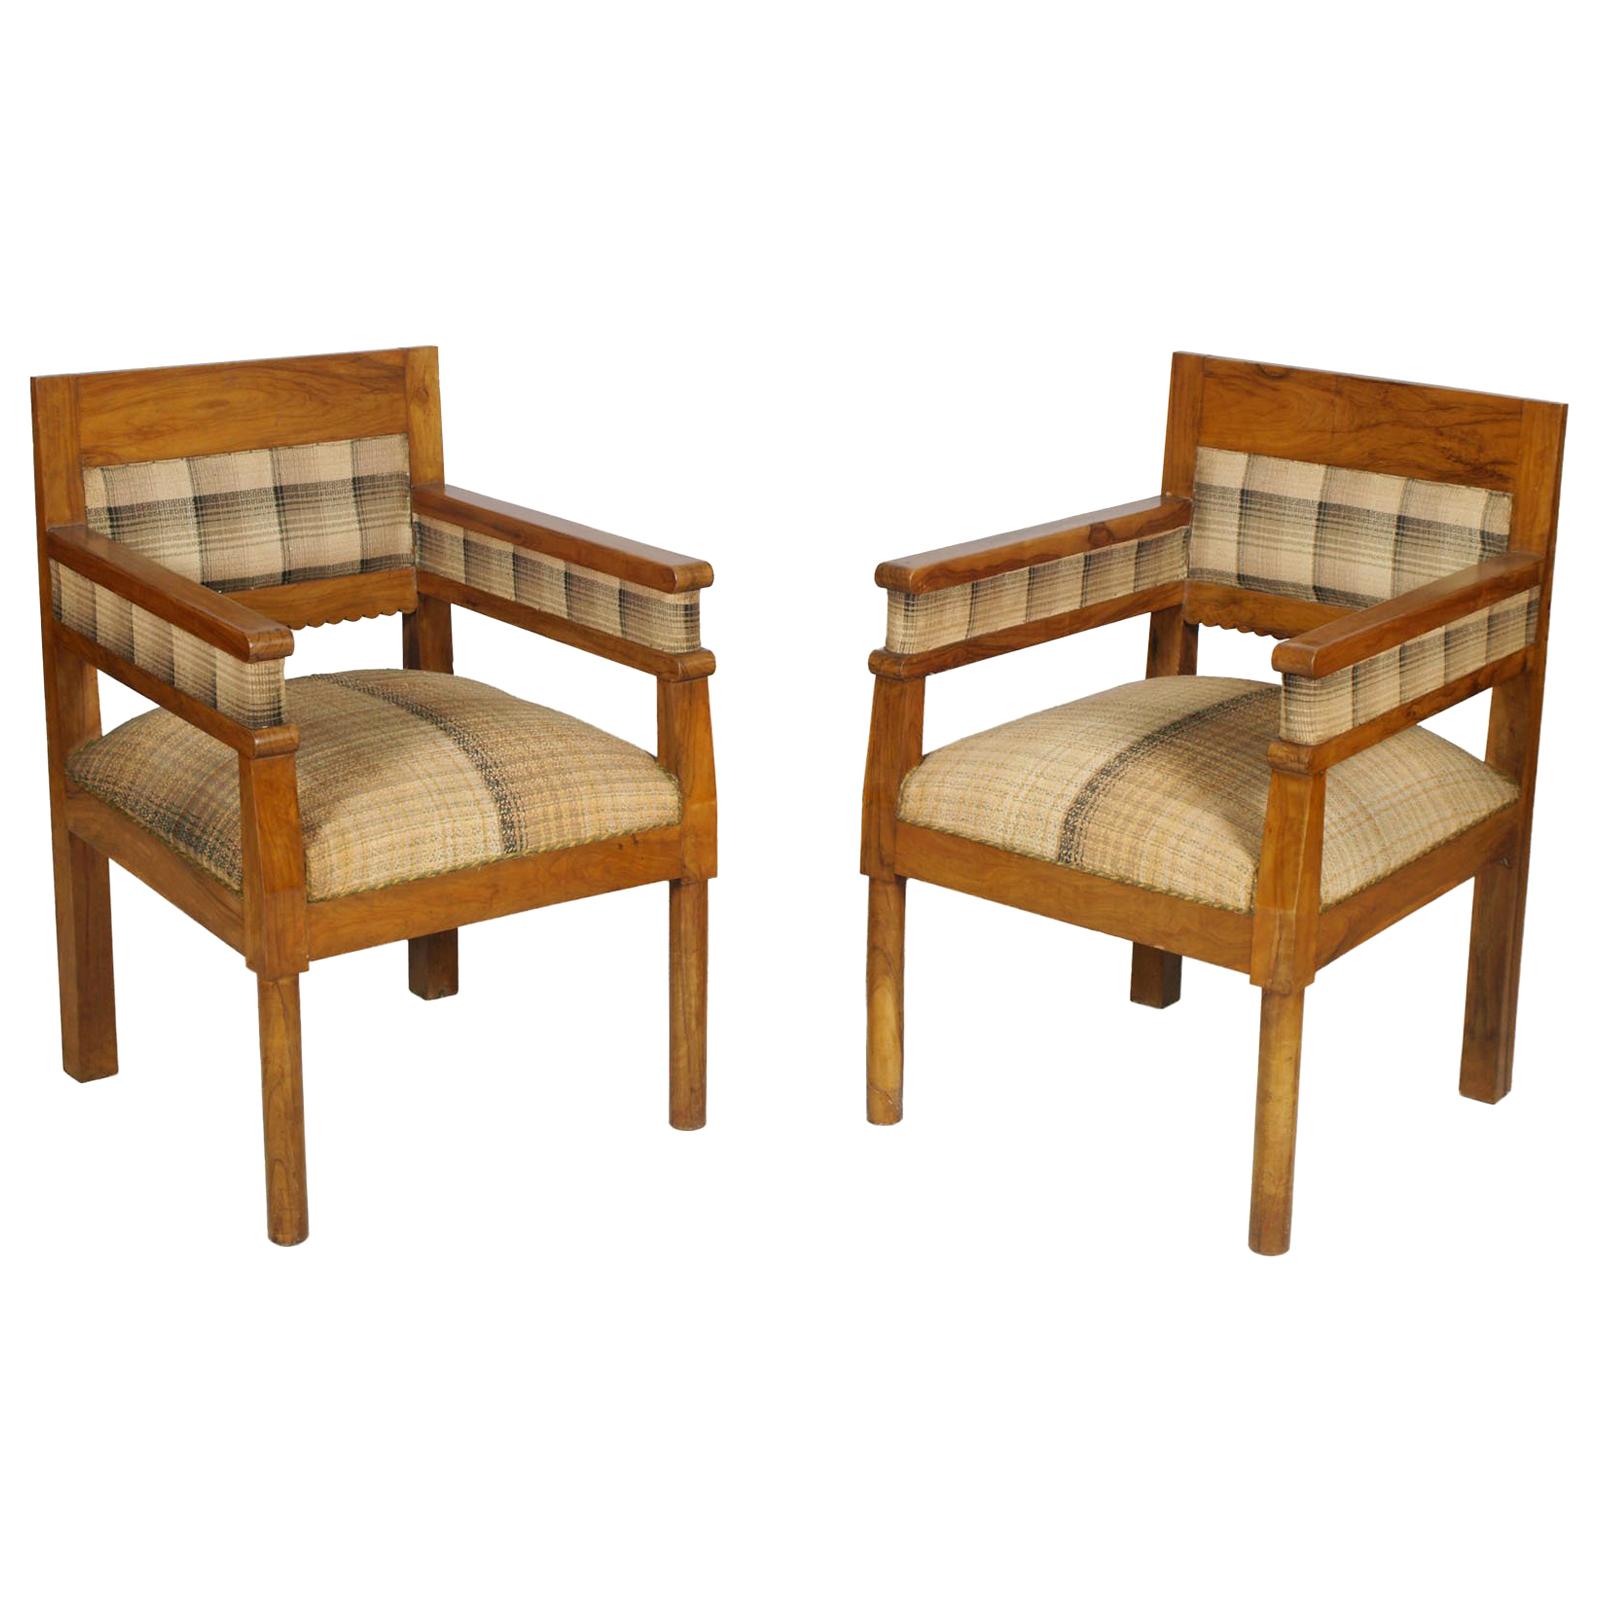 Italy Early 20th Century Art Deco Pair Armchairs, Solid Olive Wood, Wax Polished